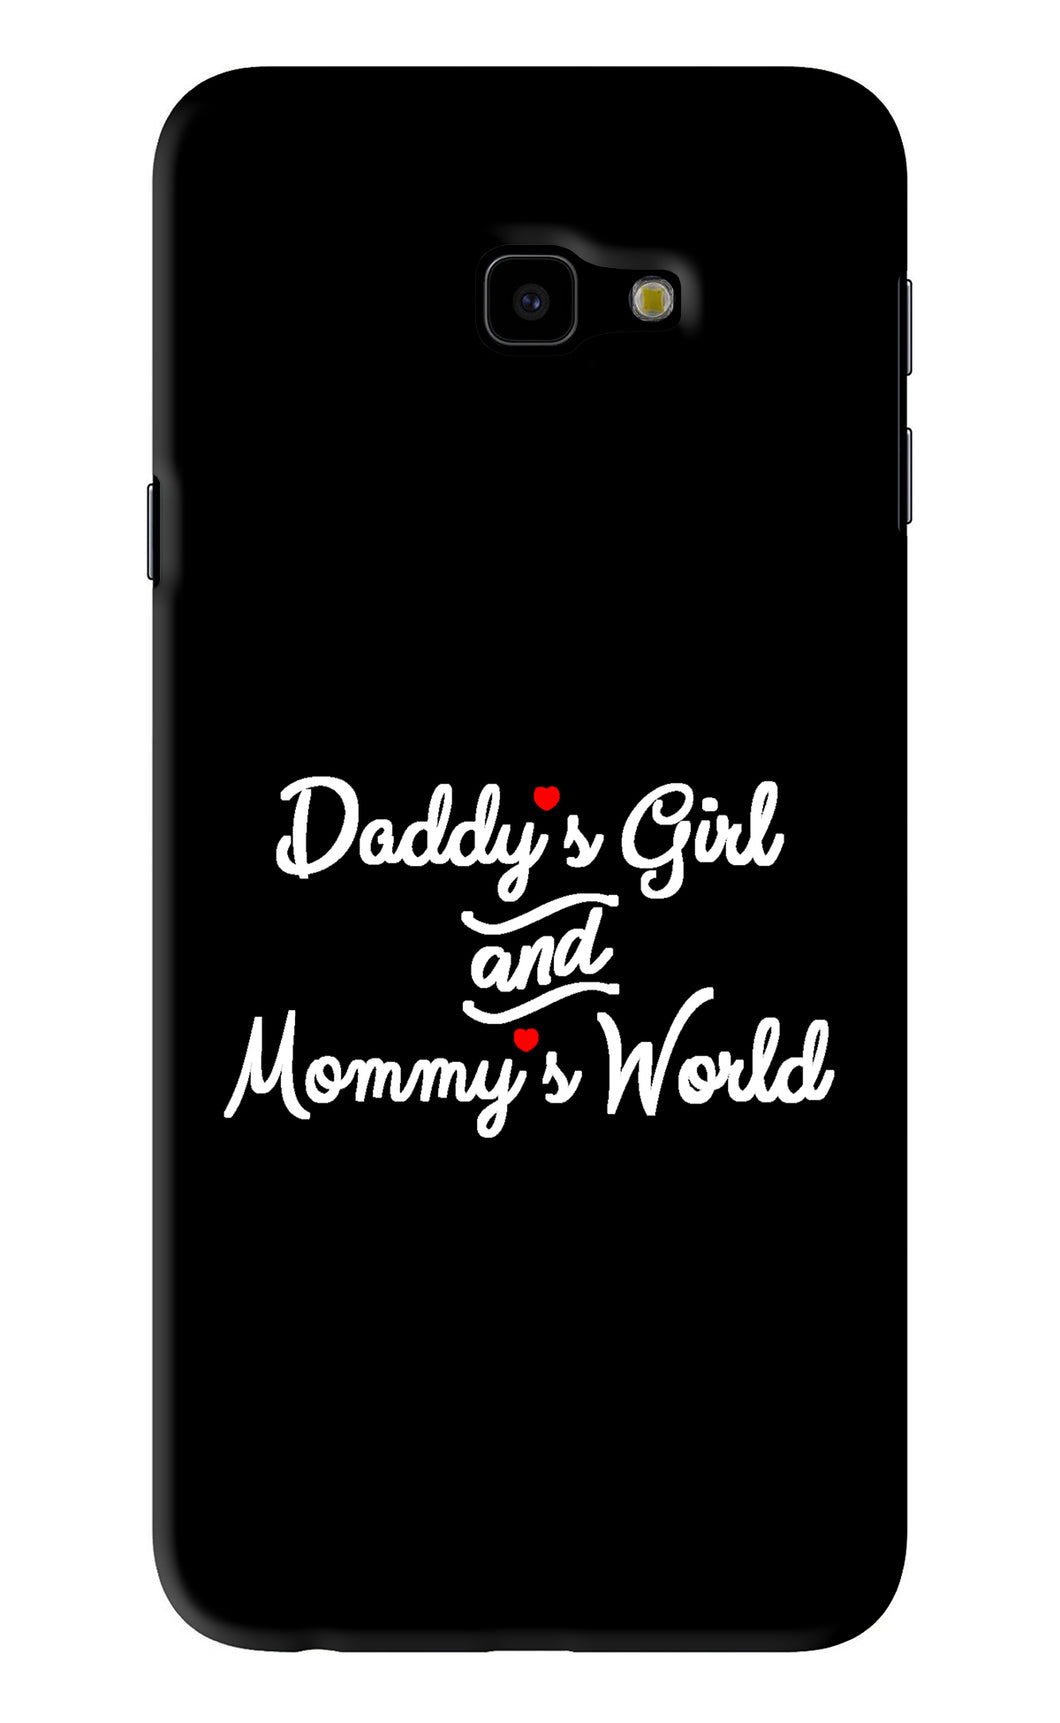 Daddy's Girl and Mommy's World Samsung Galaxy J4 Plus Back Skin Wrap